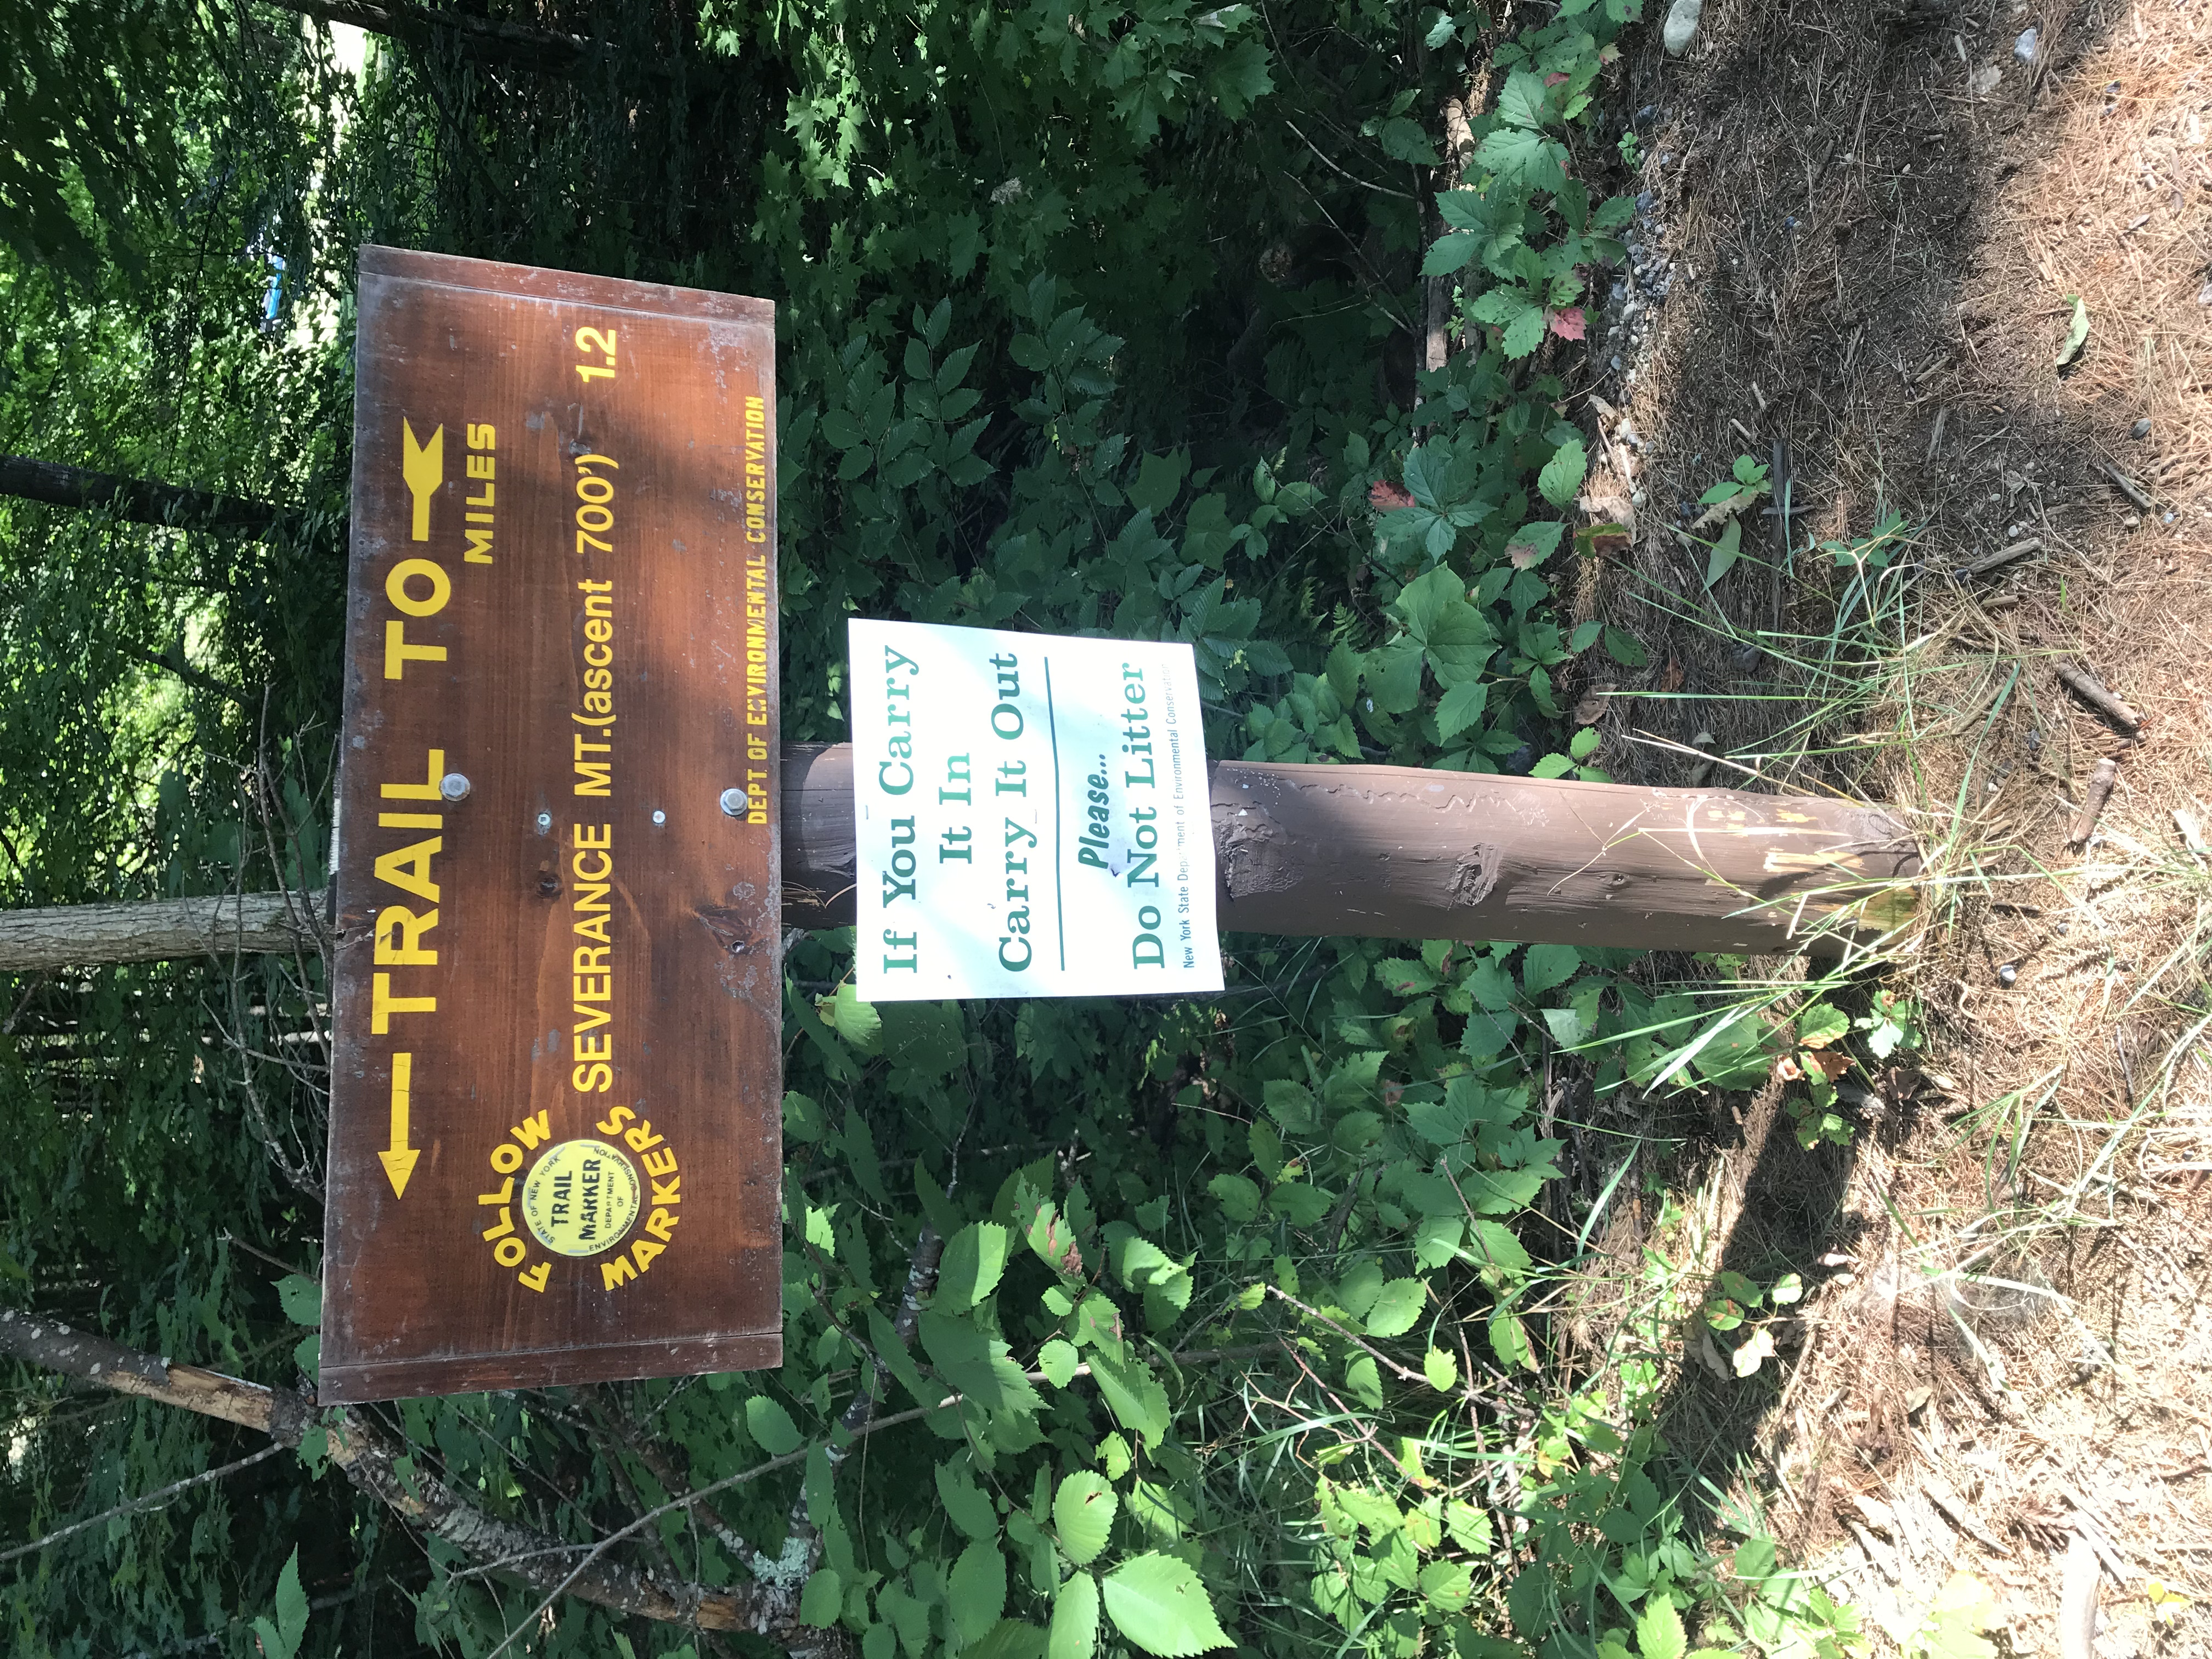 Severance Mountain Trail Sign showing it is 1.2 miles to the summit of the mountain